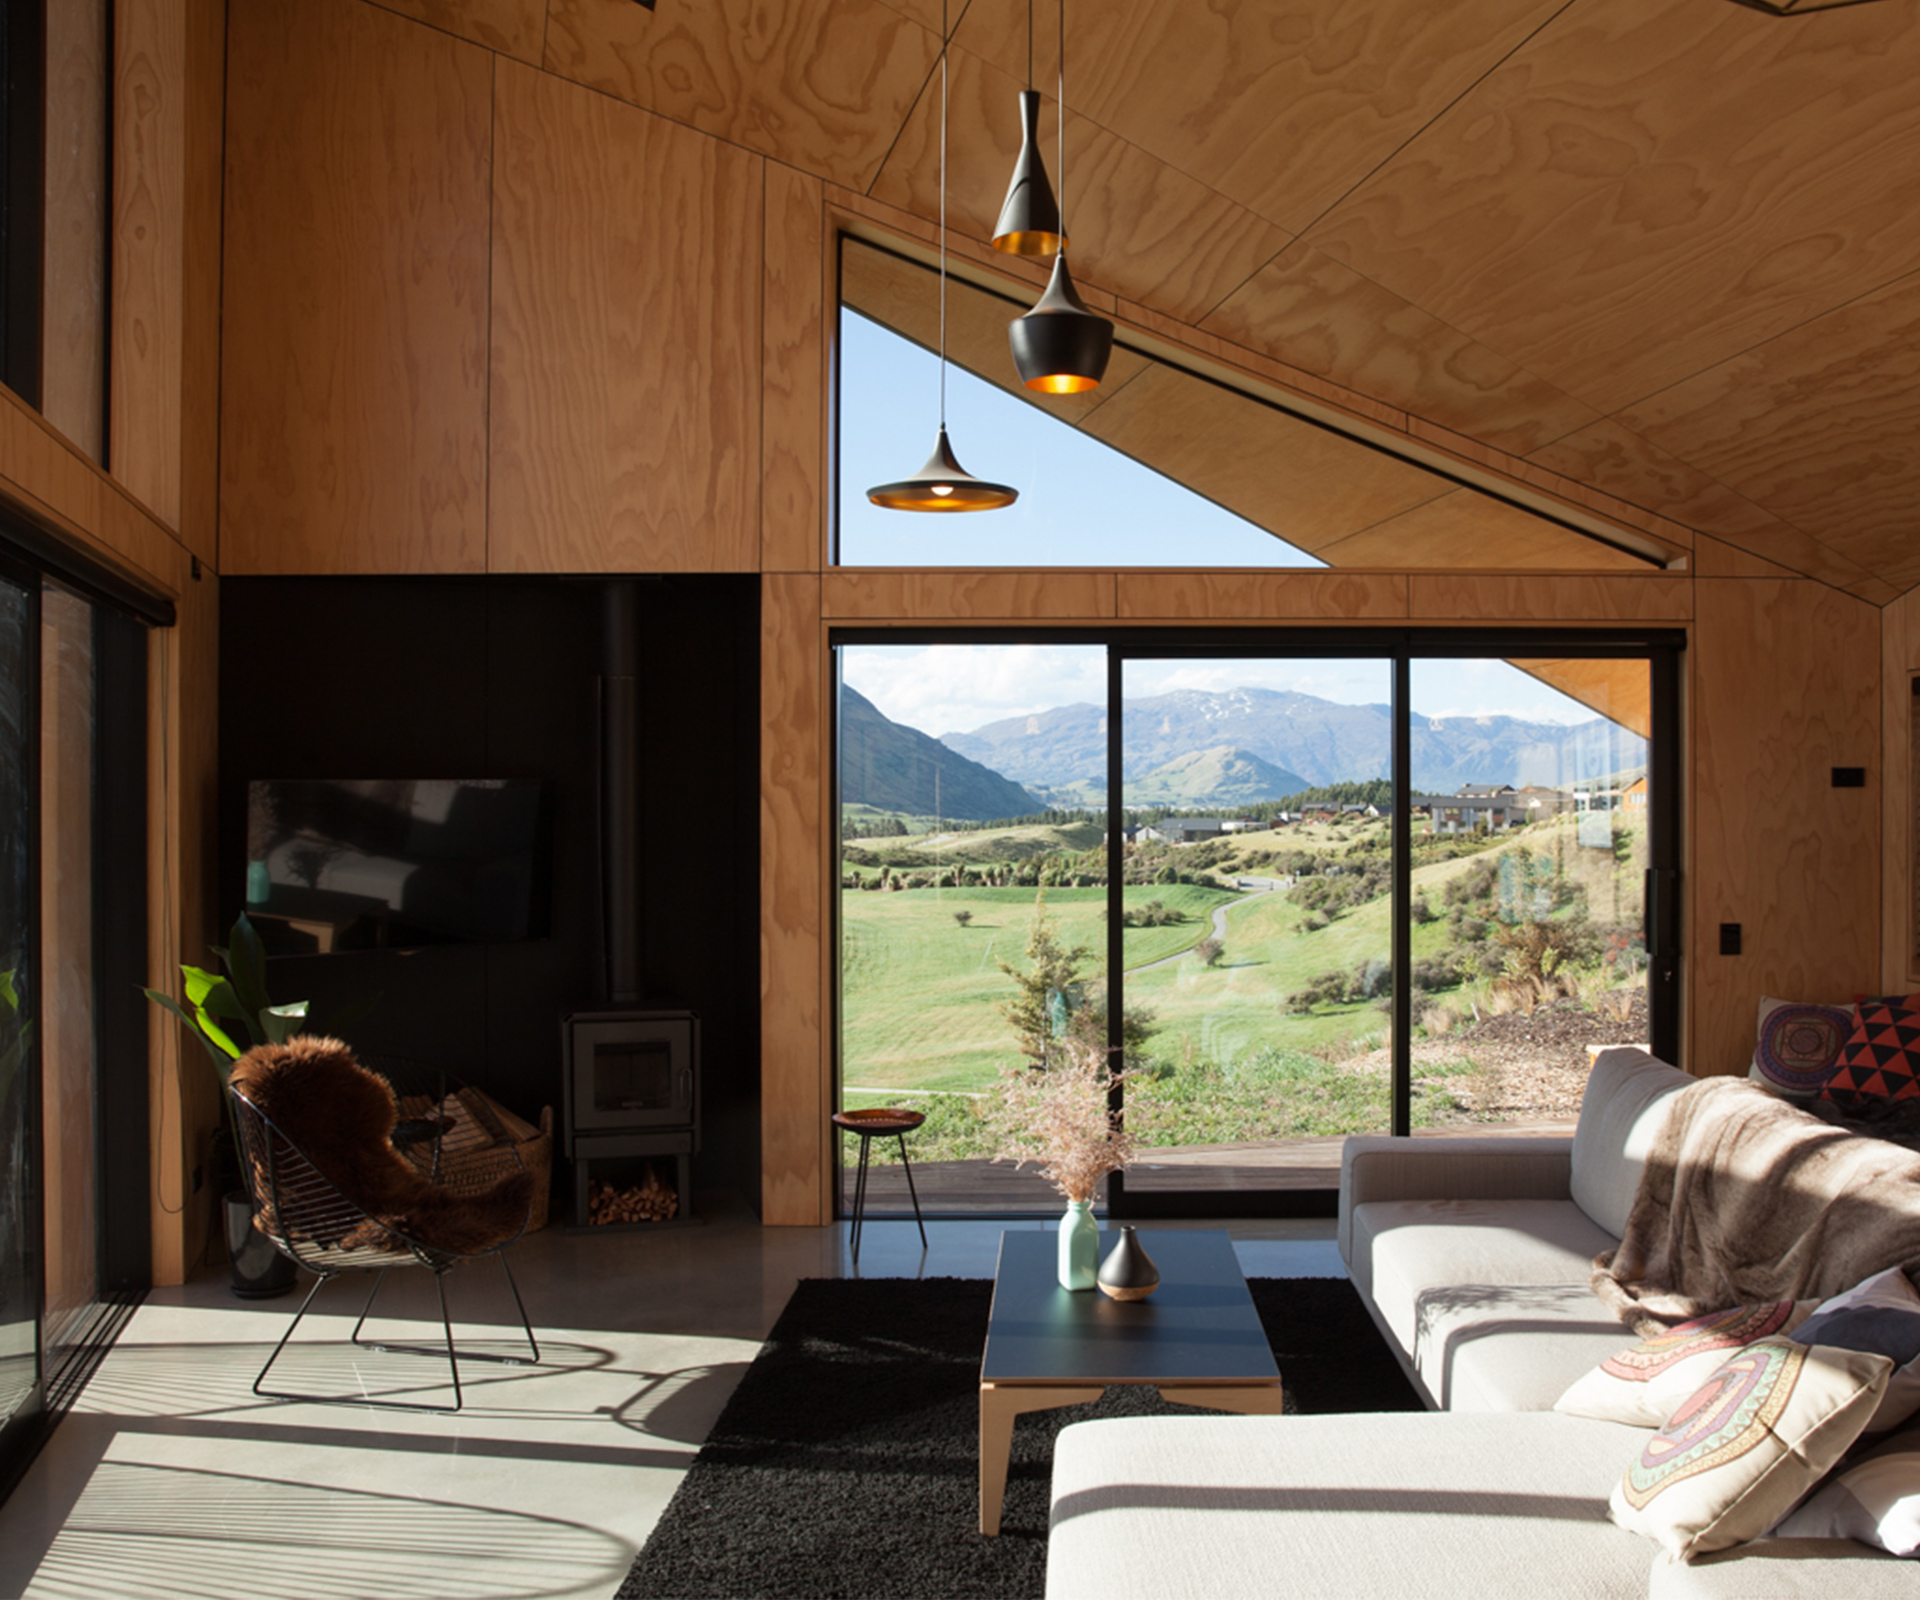 The home's living area is lined in plywood and has carefully framed views north and west.